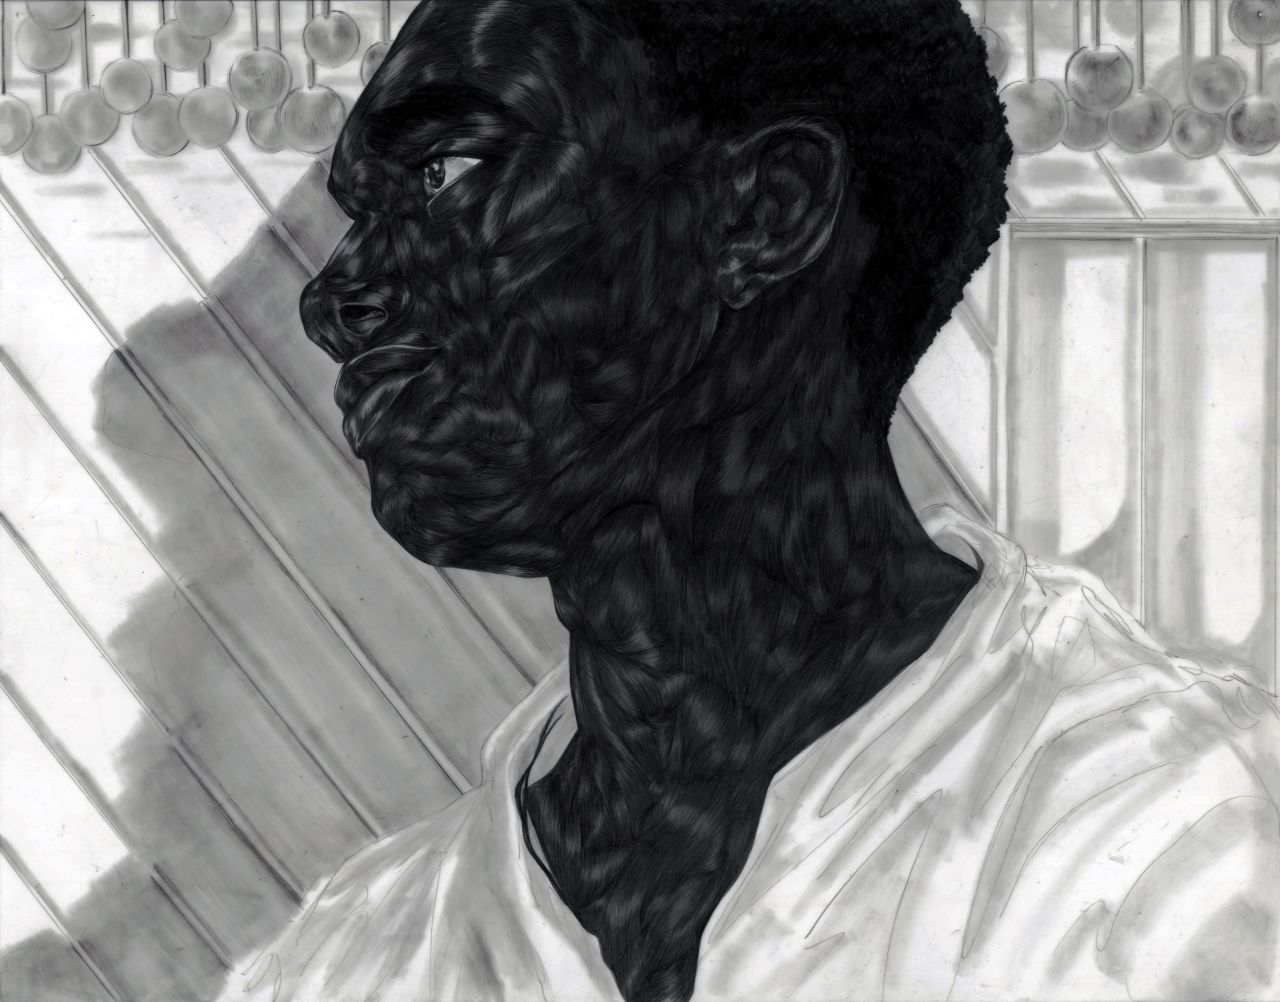 Ojih Odutola wants her art to provide a space through which viewers can reflect and arrive at their own interpretations.